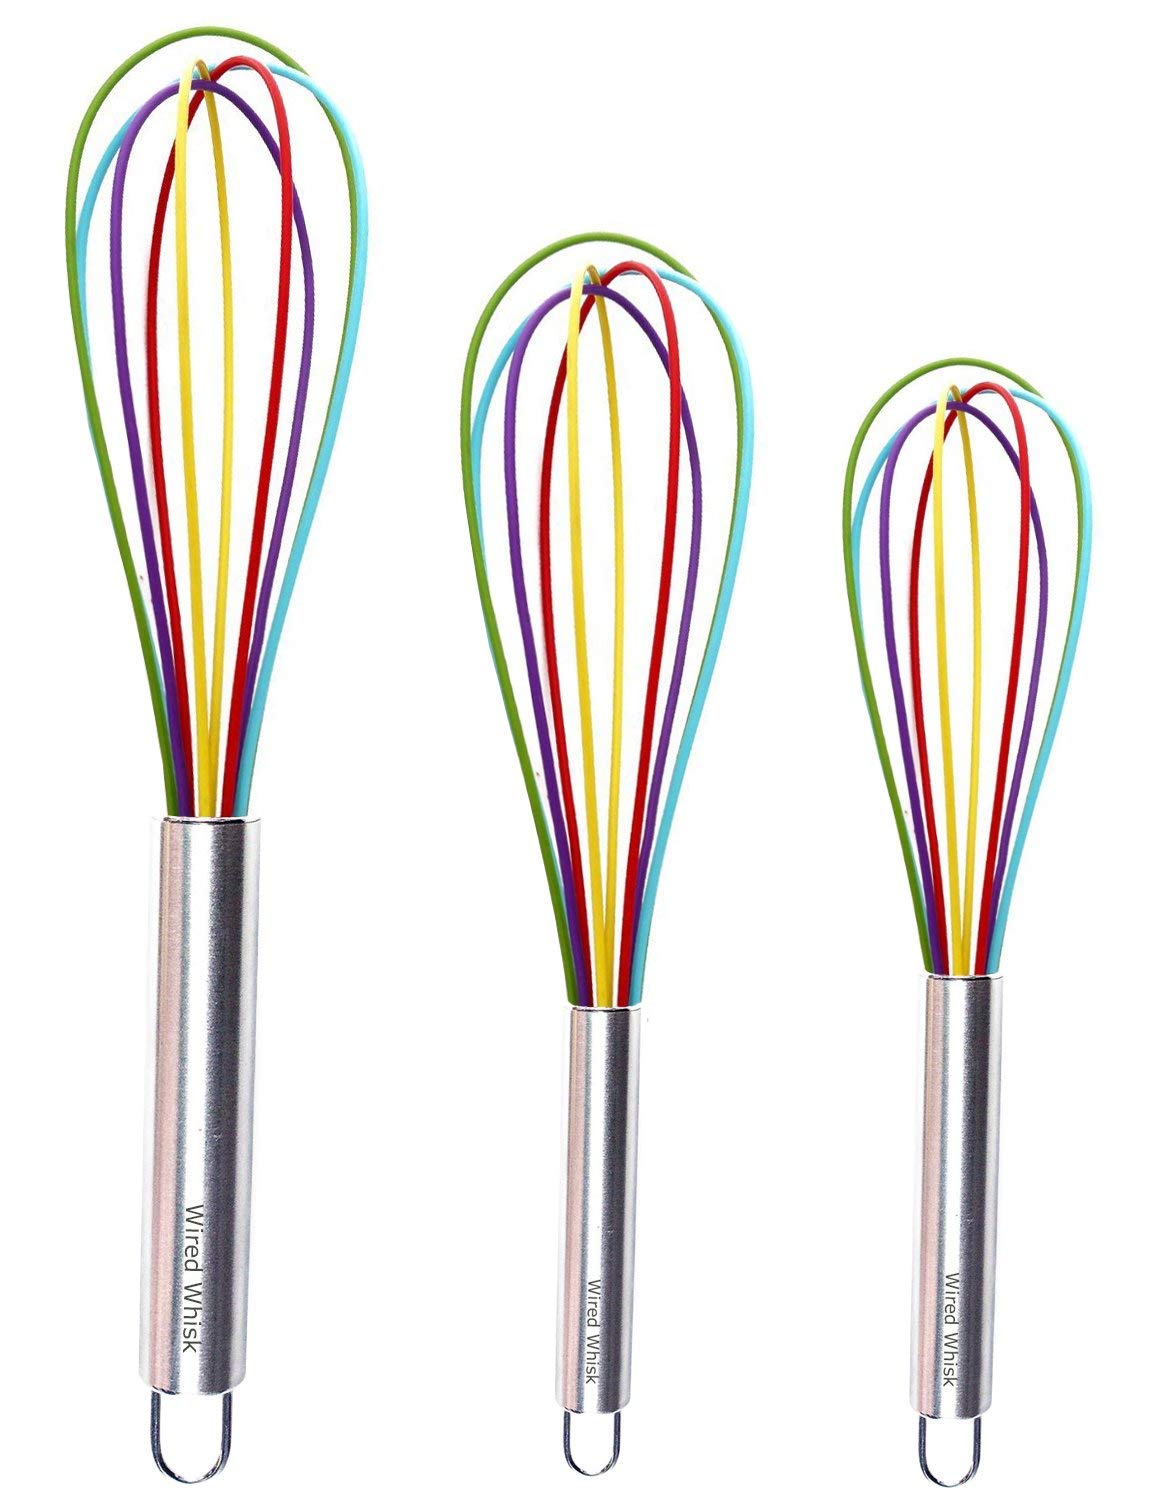 Wired Whisk Silicone Whisk Set Of 3 - Stainless Steel Silicone Non-Stick Coating - Colored Balloon Egg Beater For Blending, Whisking, Beatin